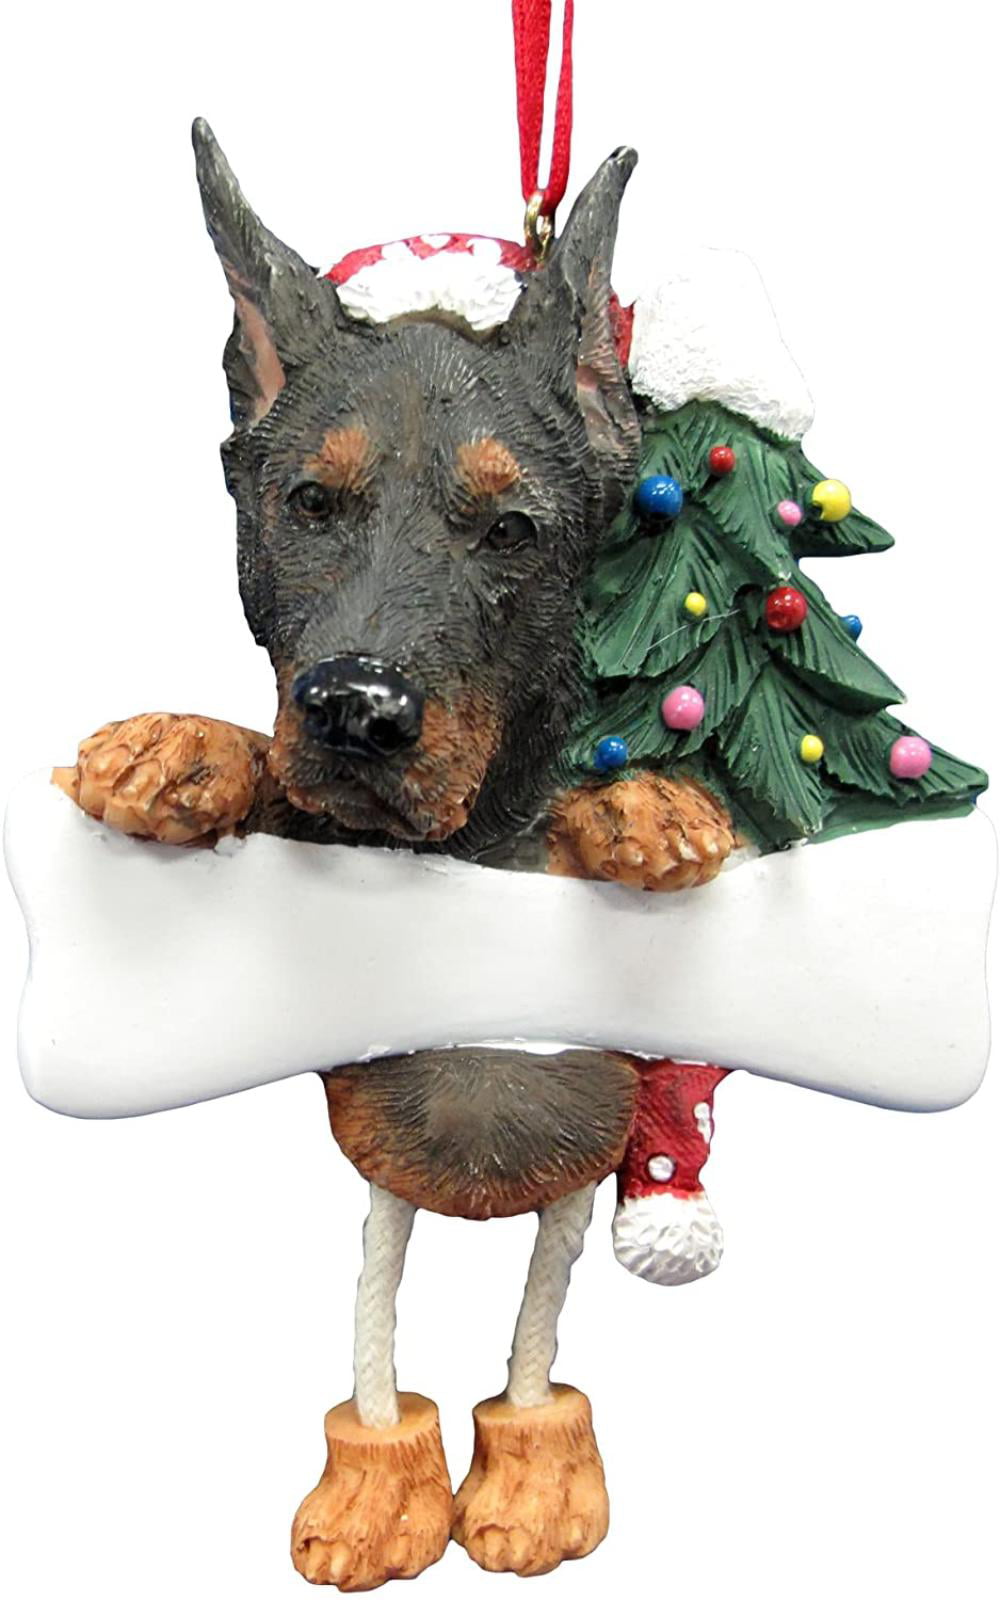 Details about   Greyhound Ornament Brindle "Dangling Legs" Hand Painted and Easily Personalized 